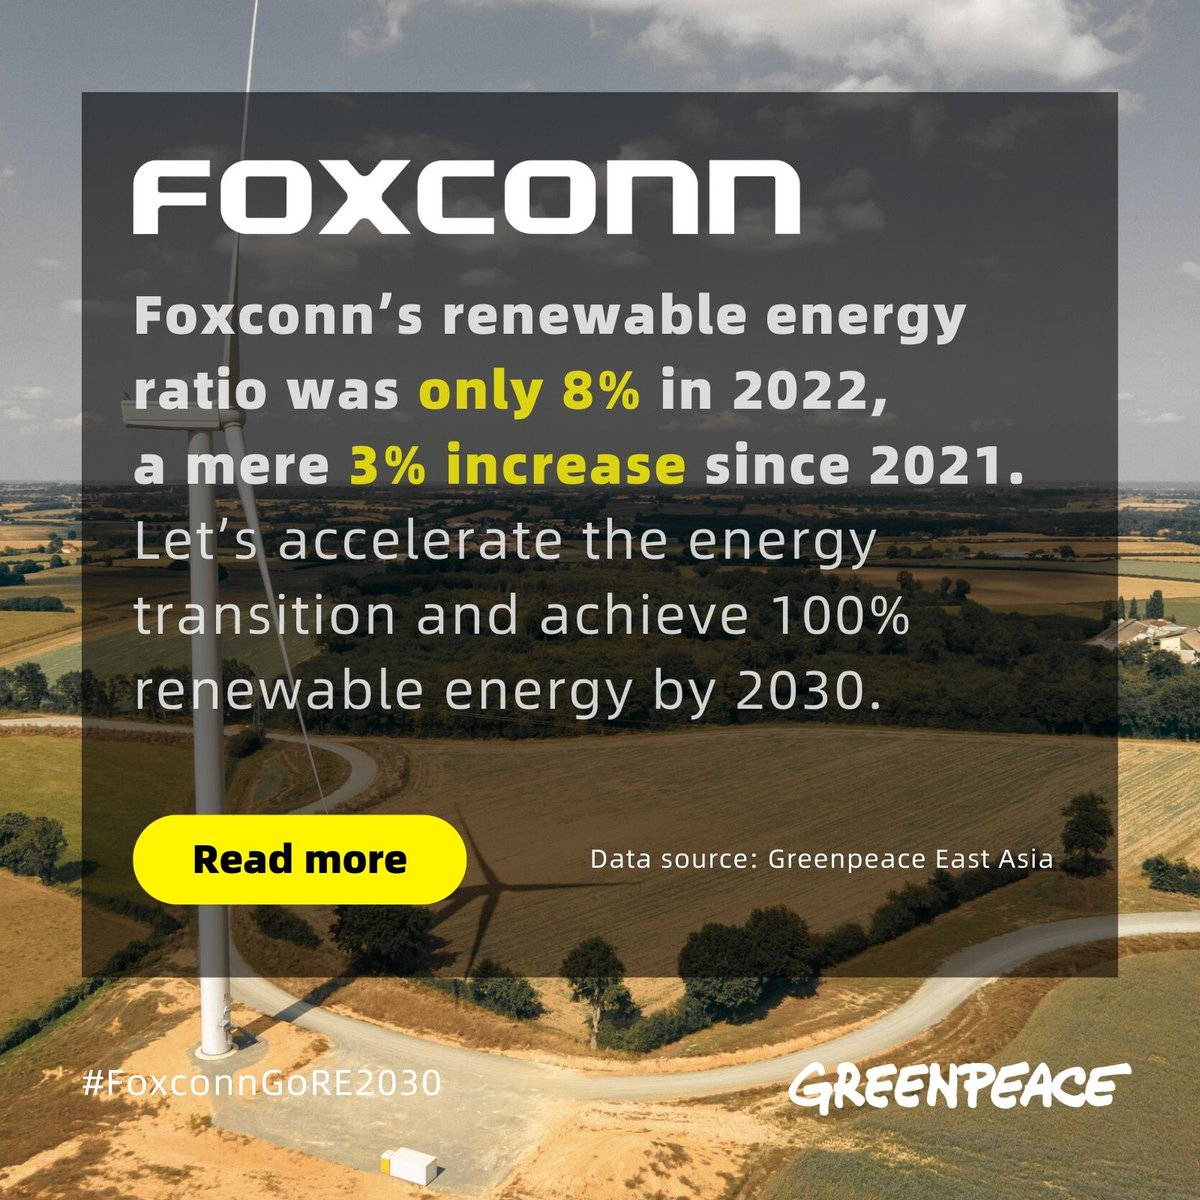 .@Apple supplier @HonHai_Foxconn  is a major climate threat. In 2022, its emissions rivaled those of Iceland. As an industry leader, it’s time for Foxconn to commit to 100% renewable energy by 2030. Read more: thediplomat.com/2024/01/apple-…

#SupplyChange #FoxconnGoRE2030